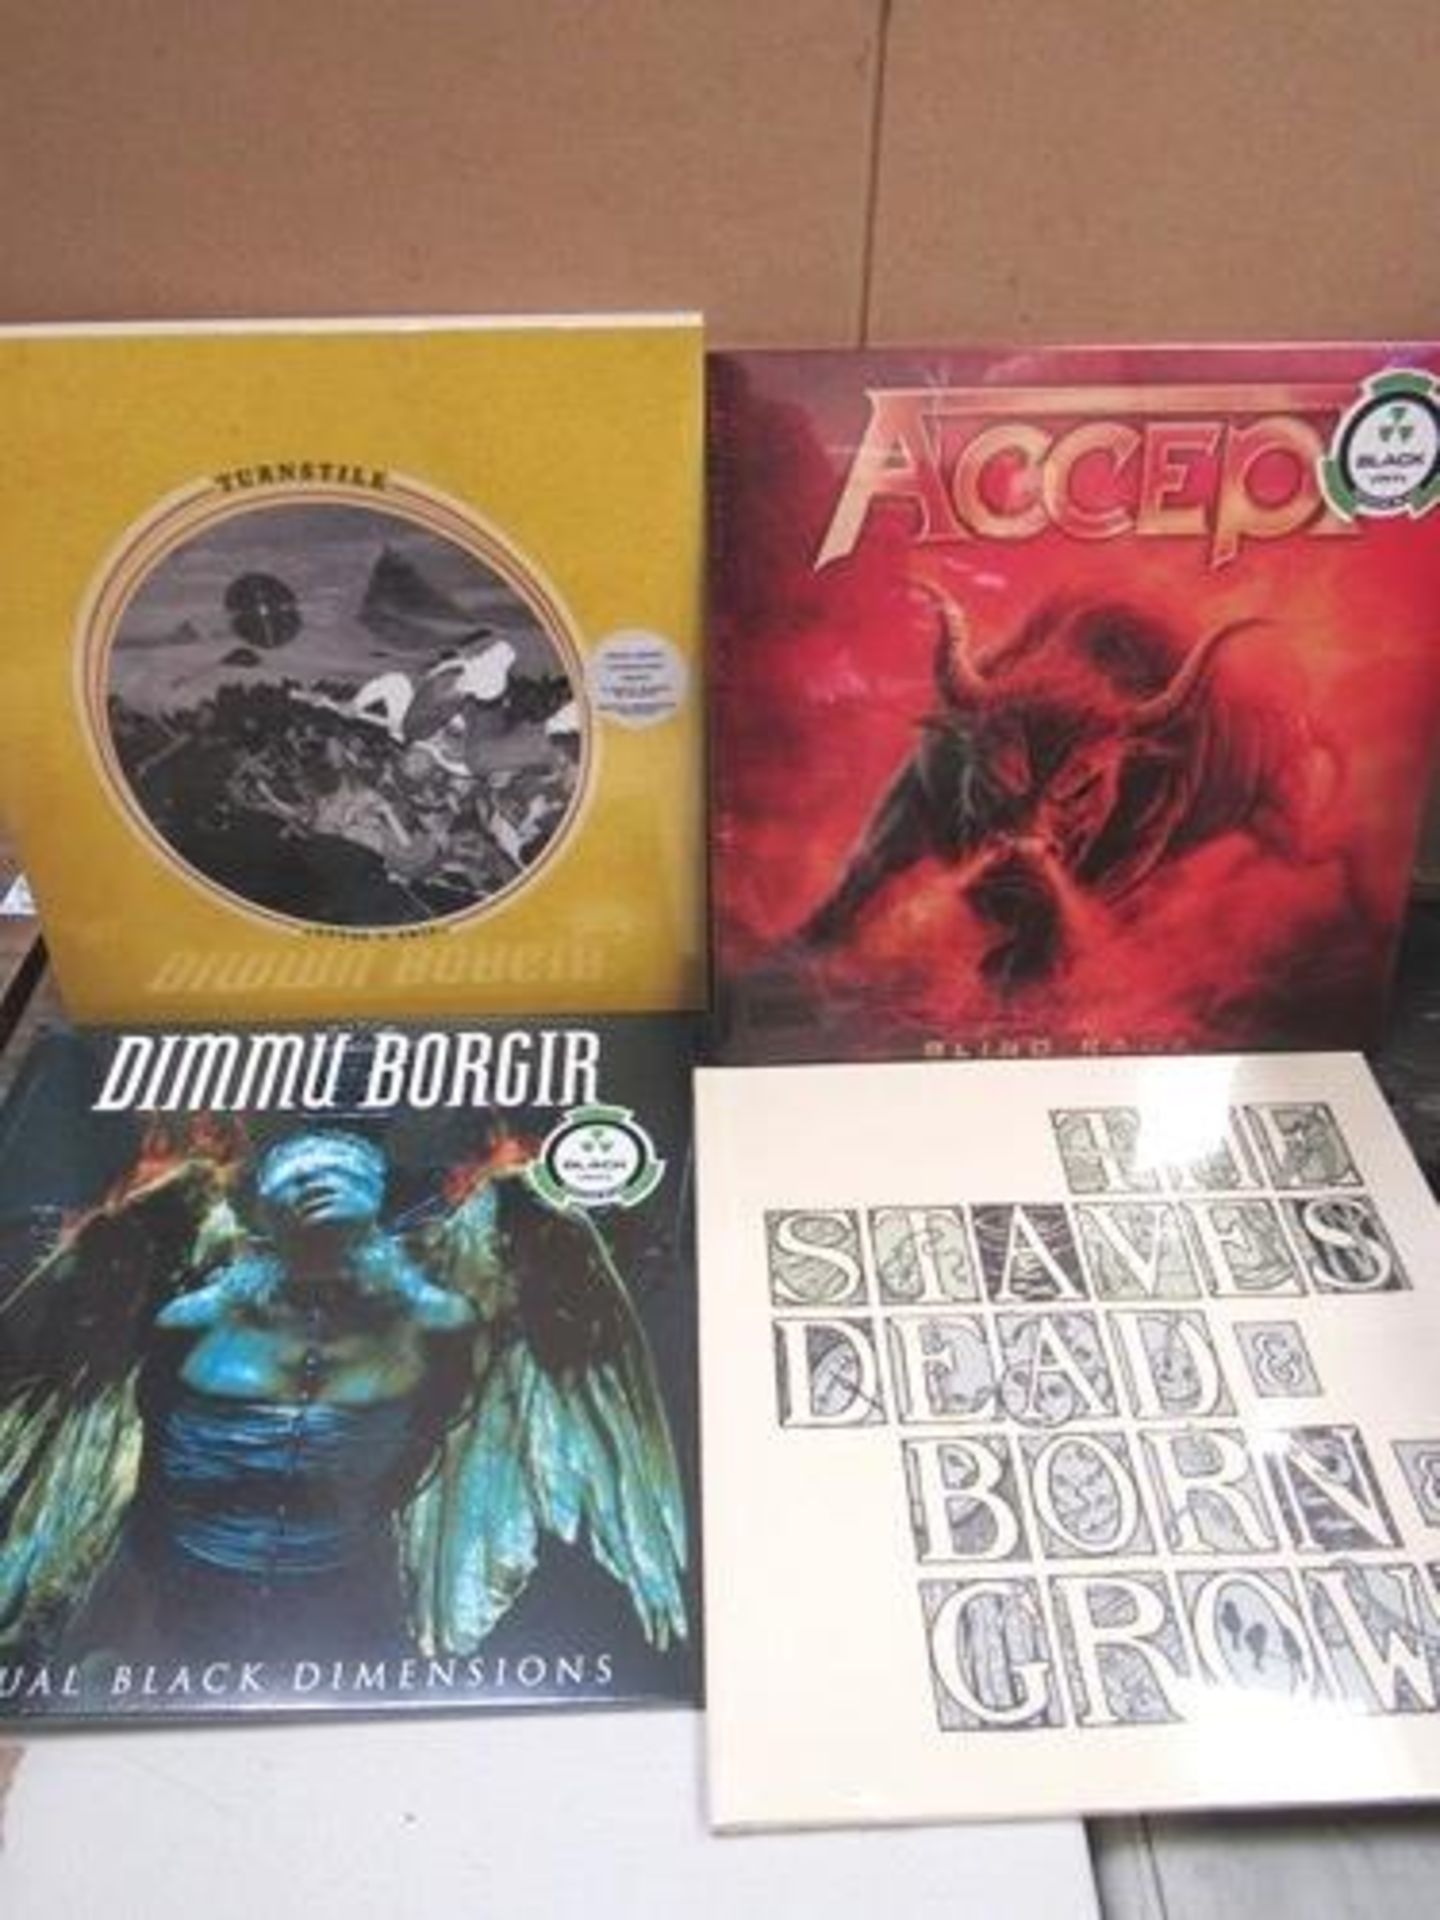 12 x vinyl's comprising Mindless Sinner Limited Edition, Malice, Inglorious, Velvet Viper, The